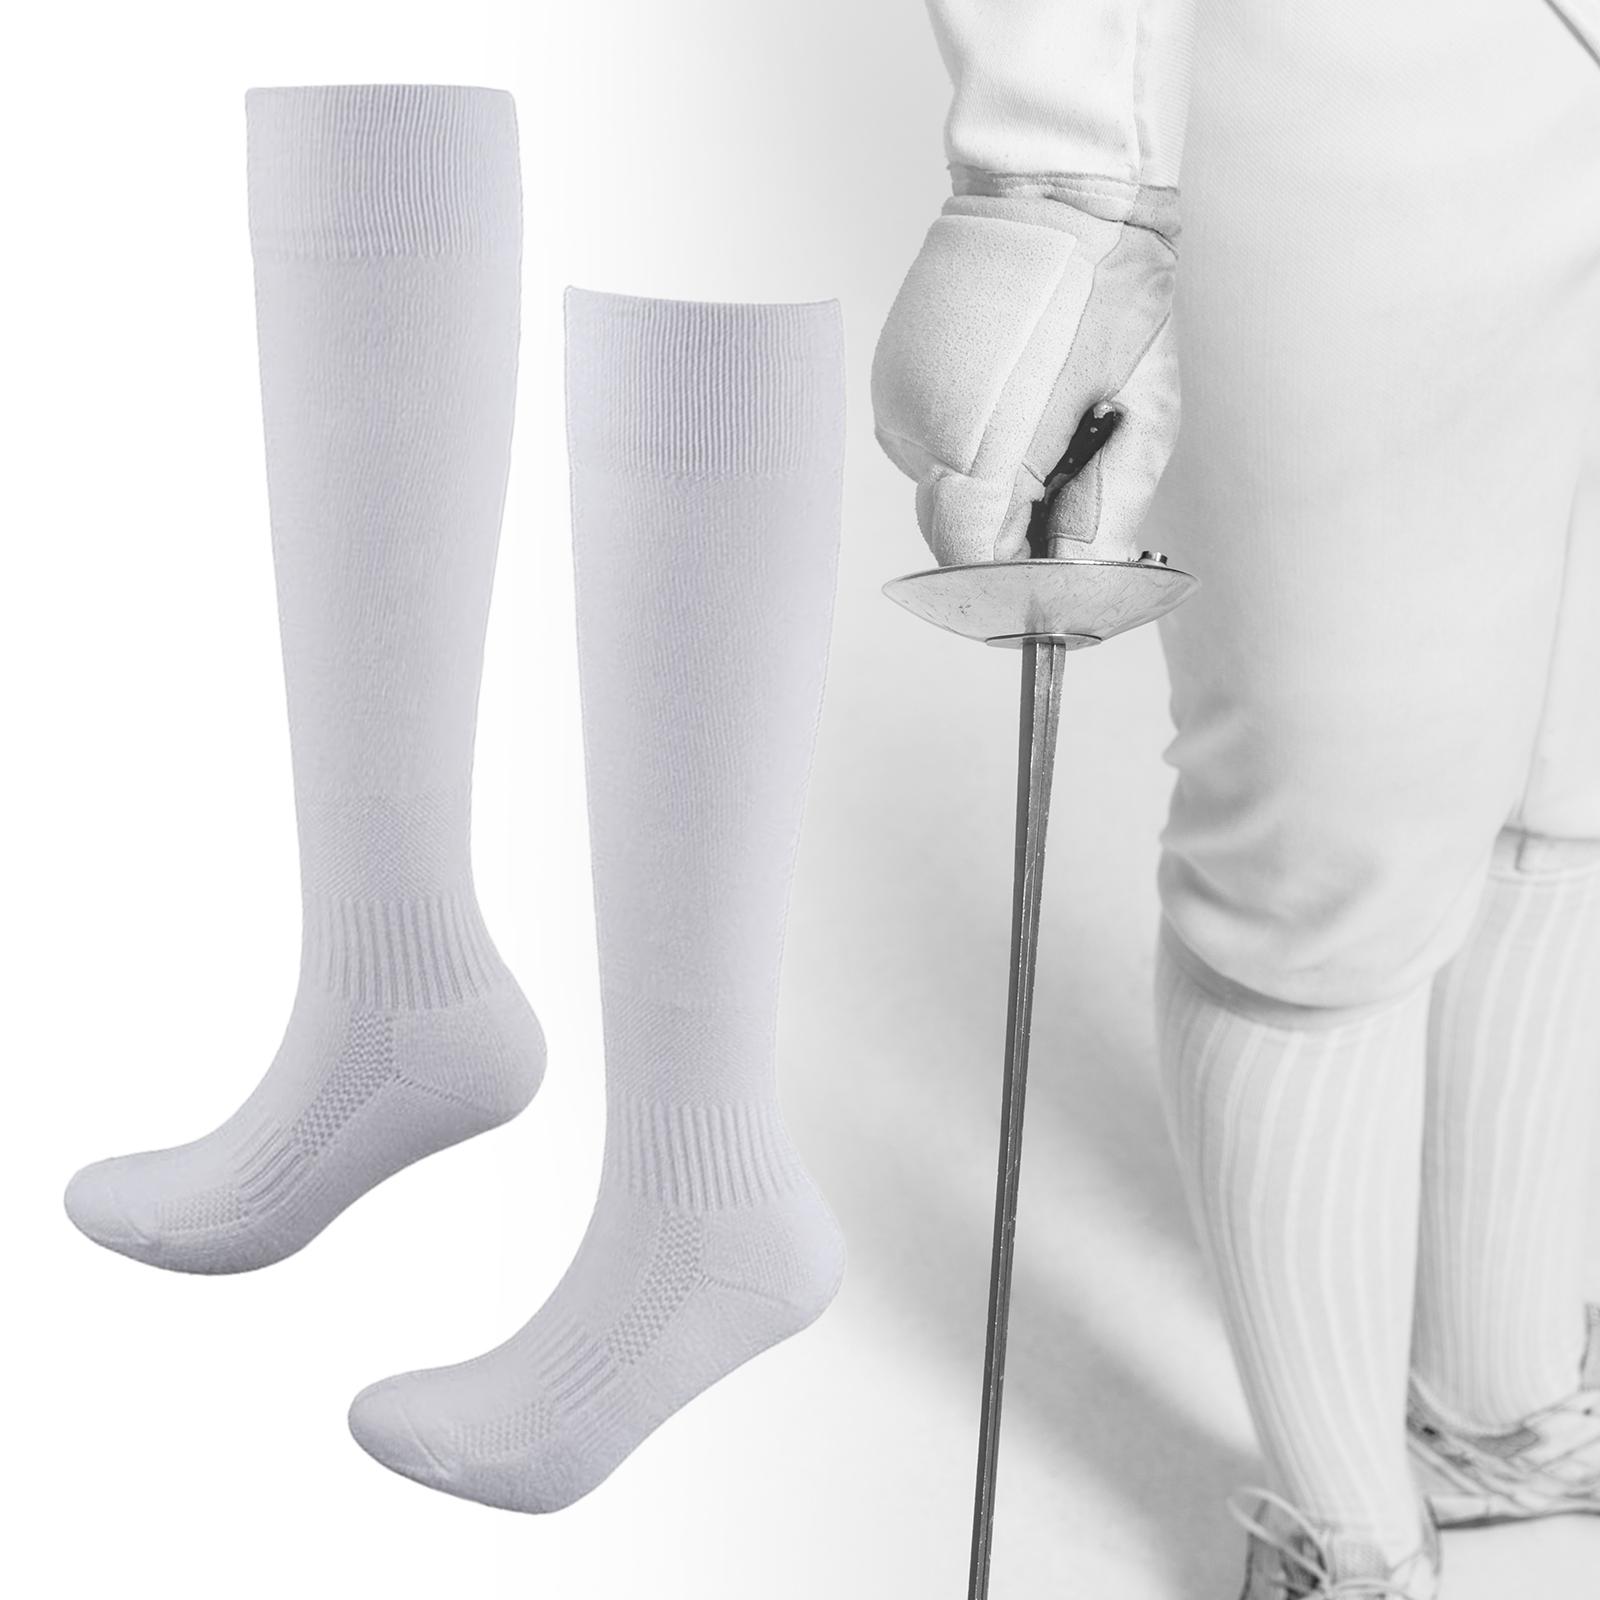 Fencing Socks Unisex Stretchy Unisex Fencing Stockings for Girls Adult M White 